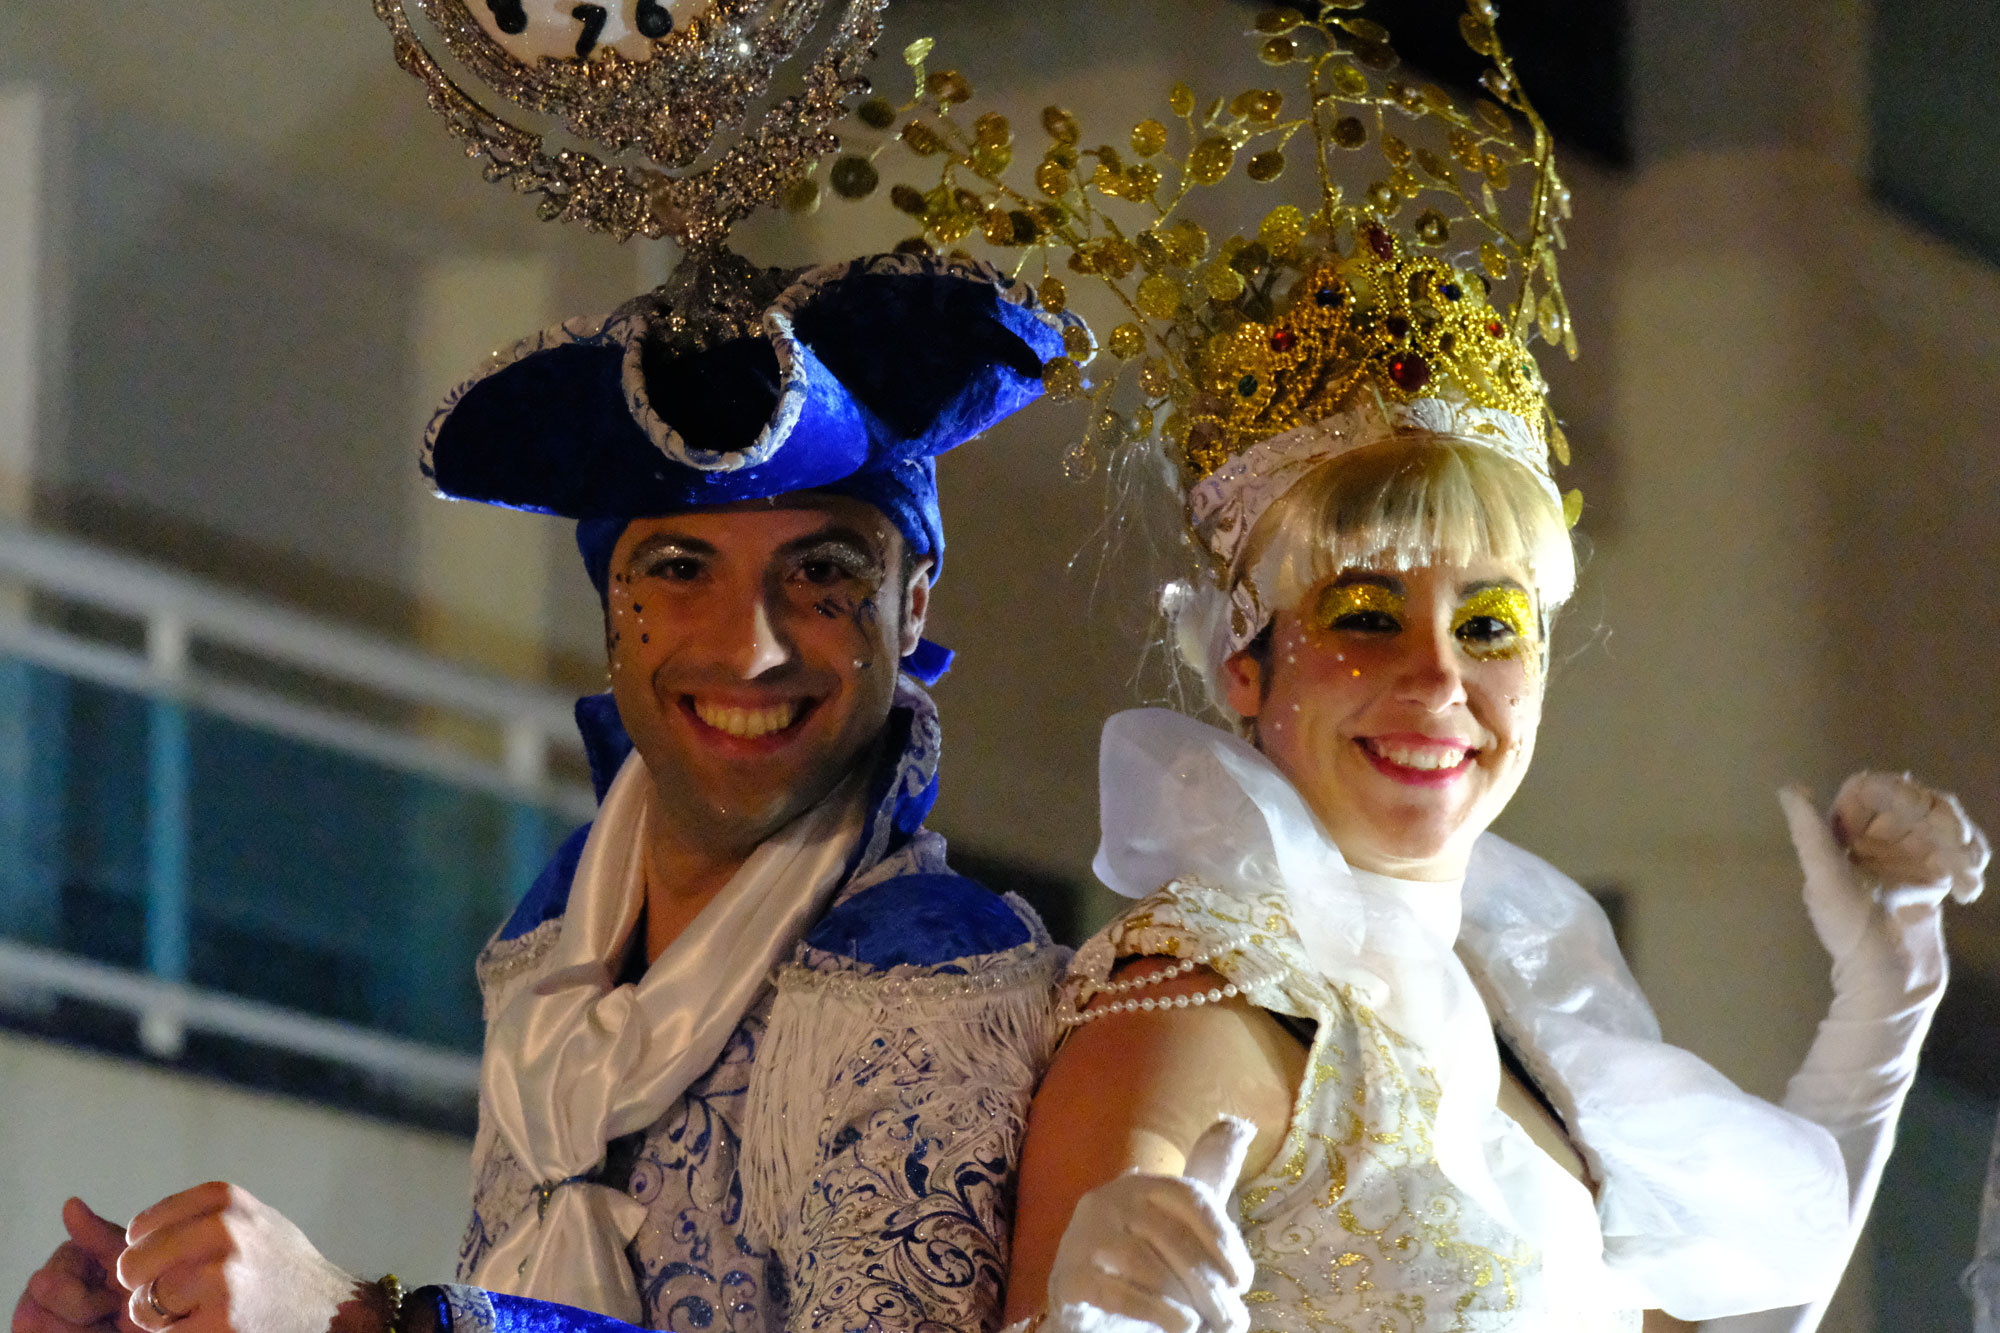 A boy and a girl at the Xurigué Carnival of Calafell